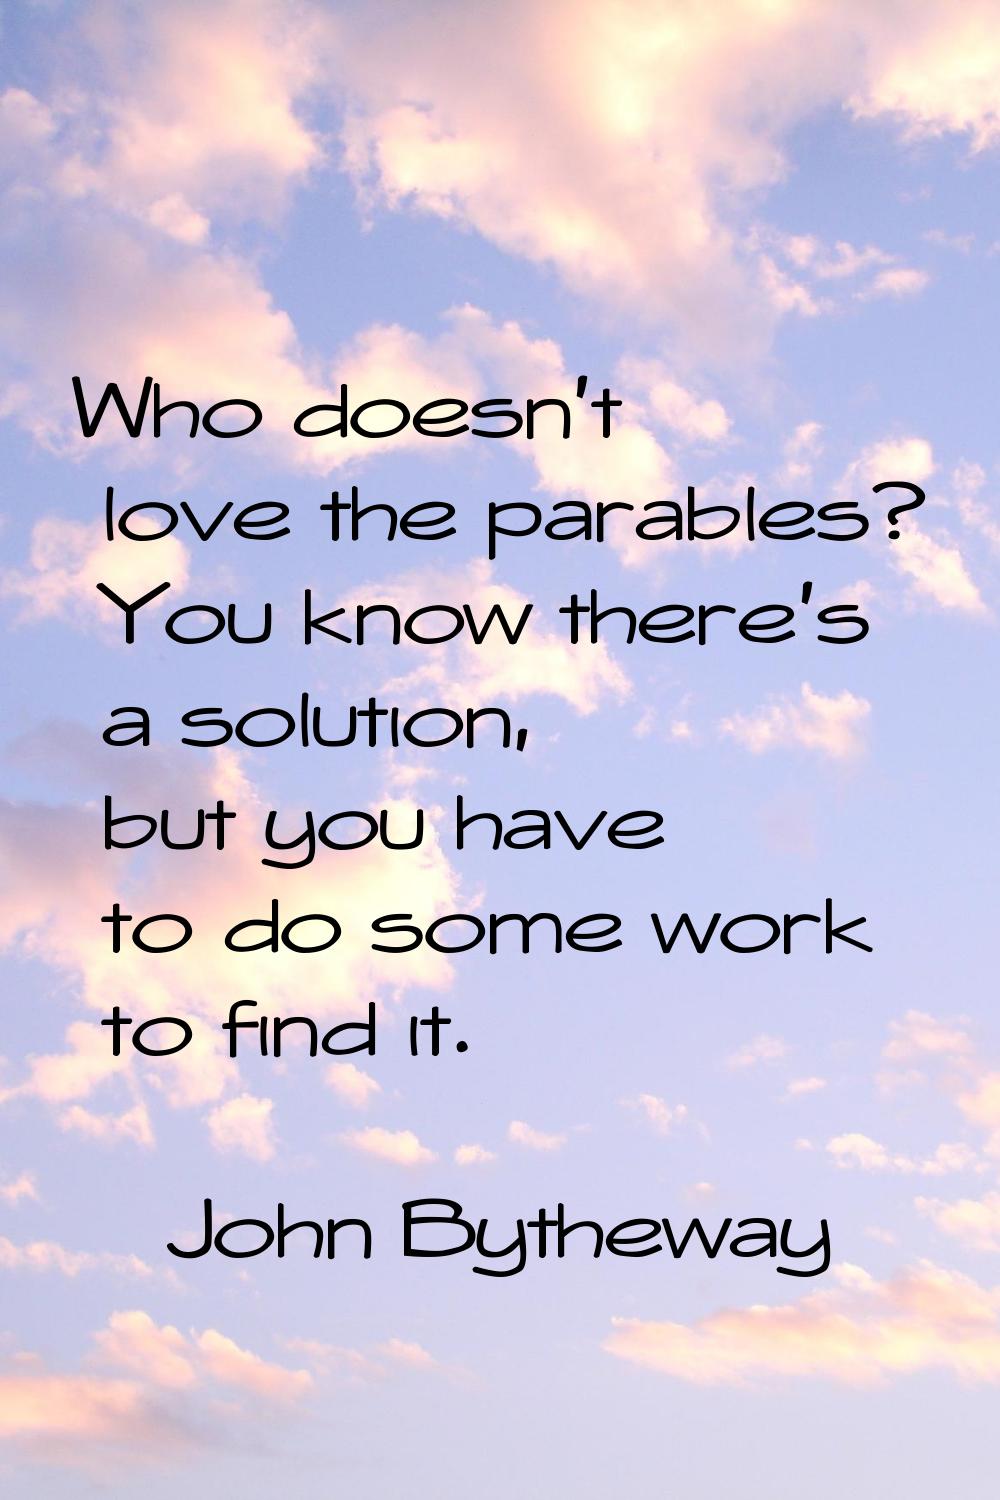 Who doesn't love the parables? You know there's a solution, but you have to do some work to find it